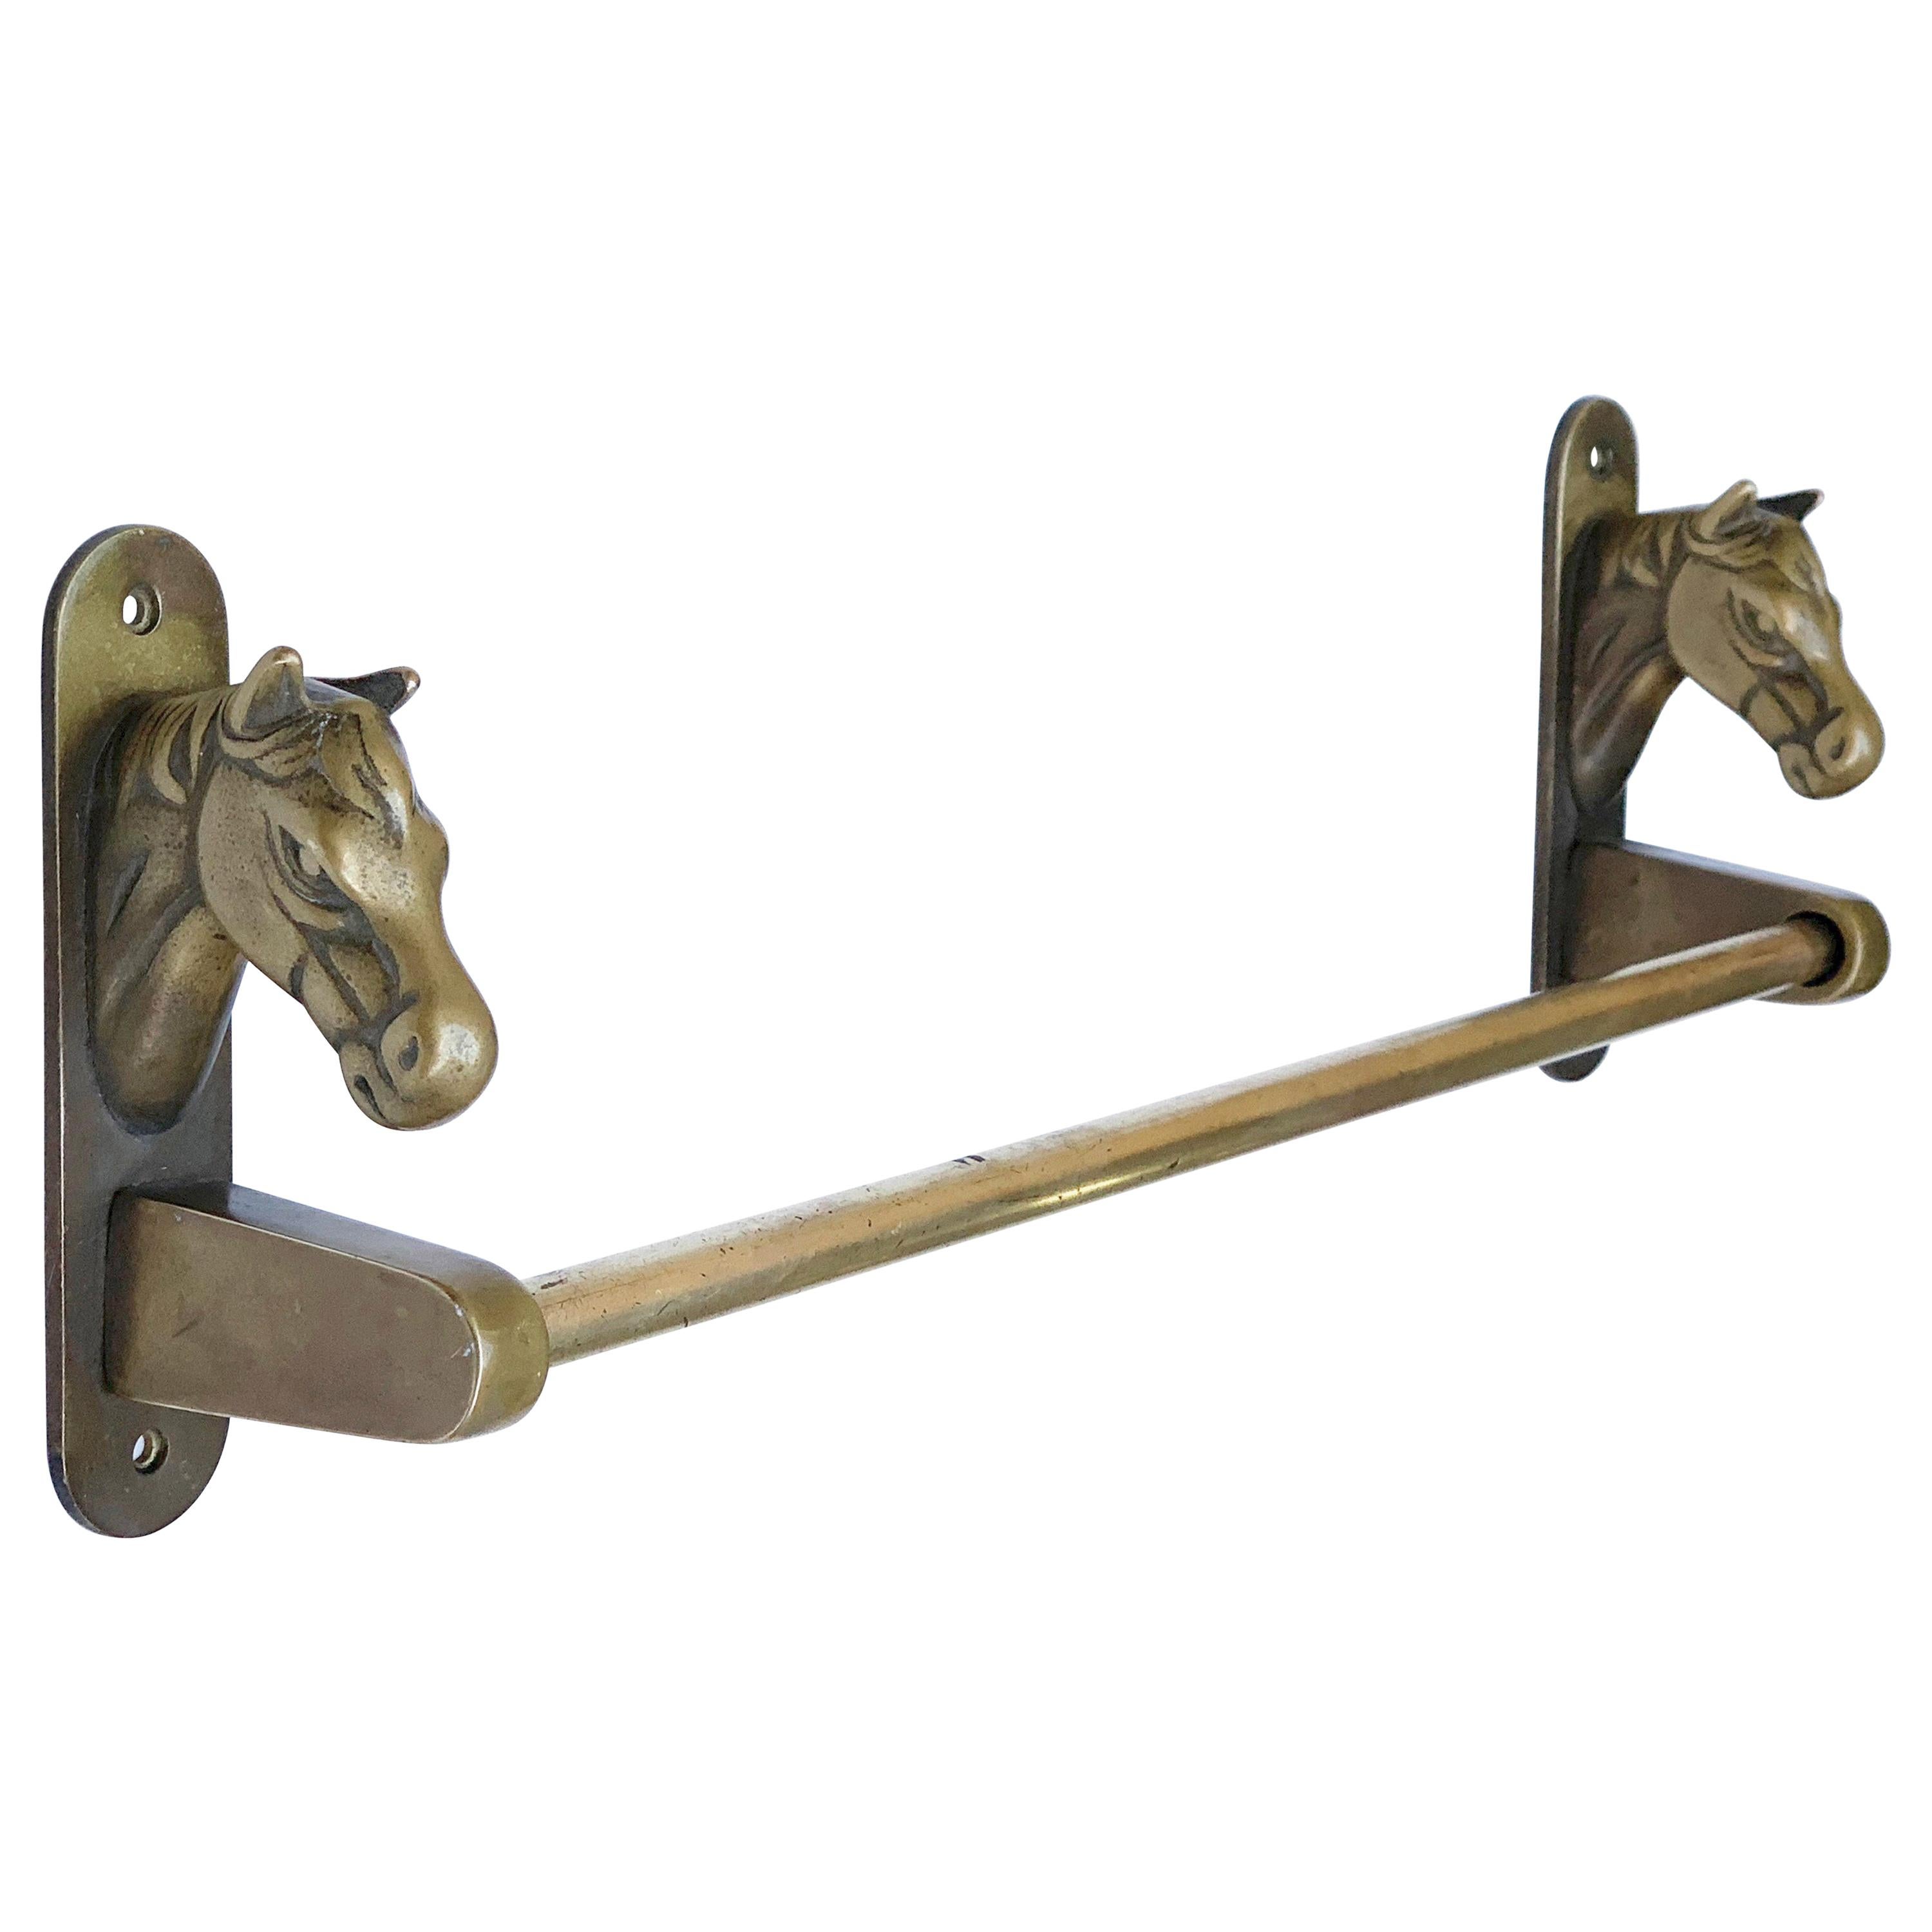 Midcentury Solid Brass Italian Towel Holder with Horse Heads, 1950s